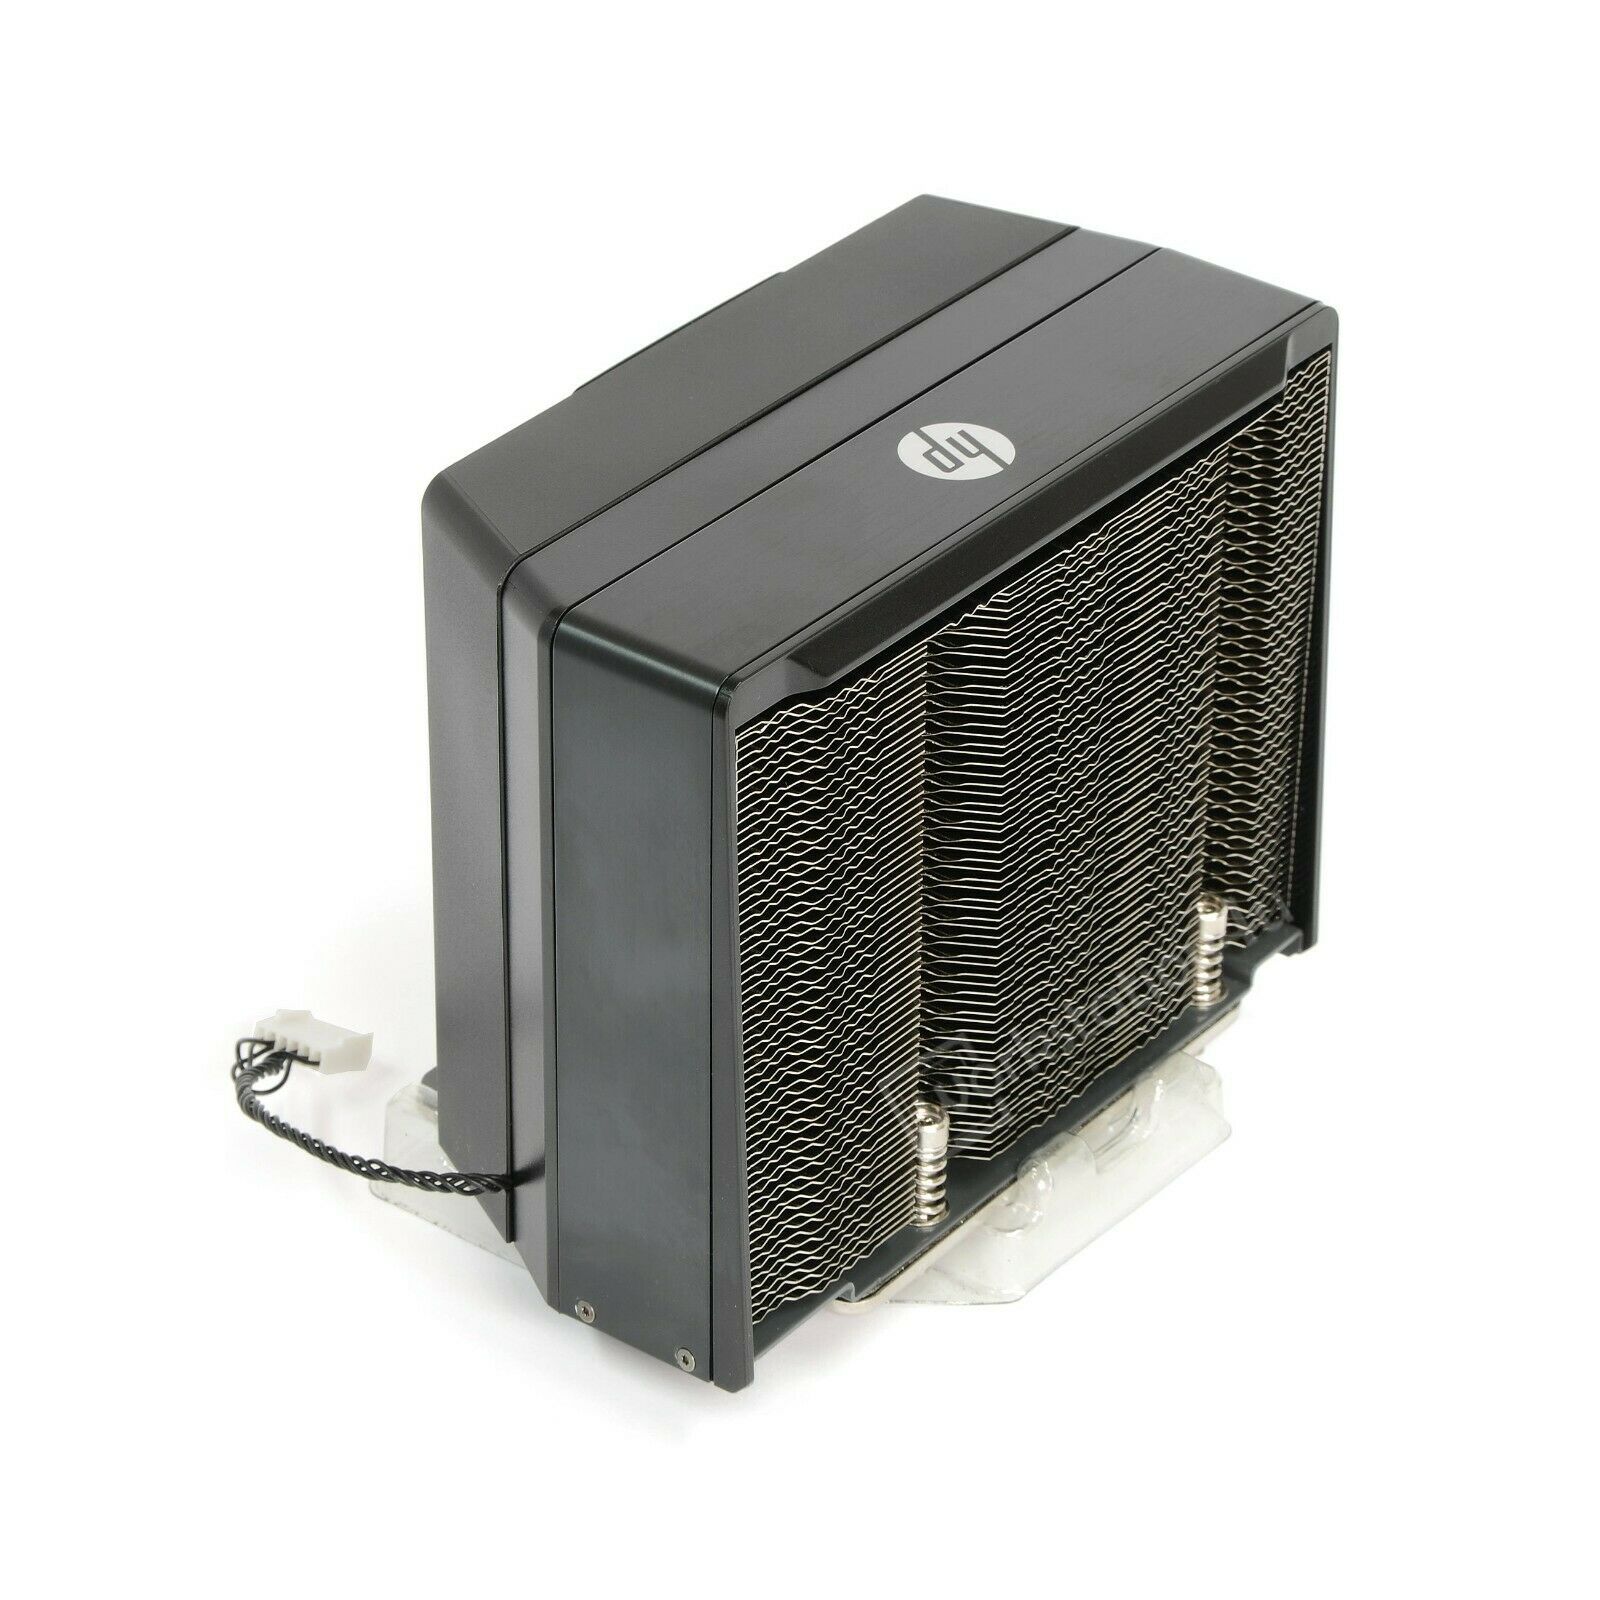 HP Z440 Z Cooler SILENT W 3D Vapor P/N N3R51AV is also compa... - HP  Support Community - 8096520